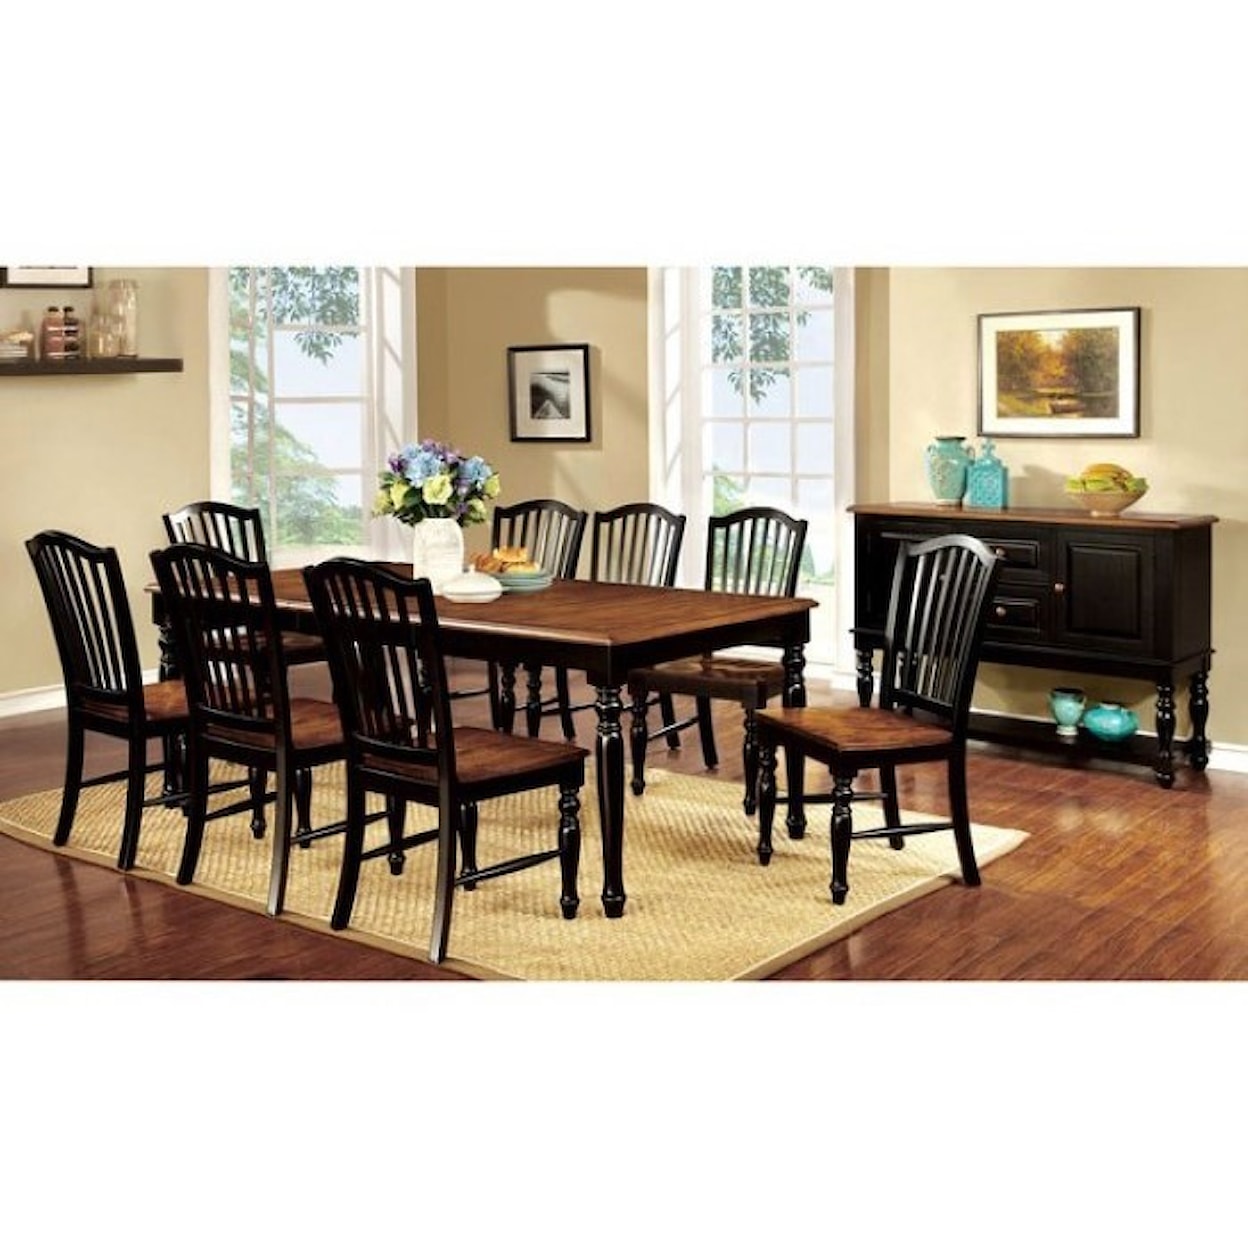 Furniture of America Mayville Dining Table